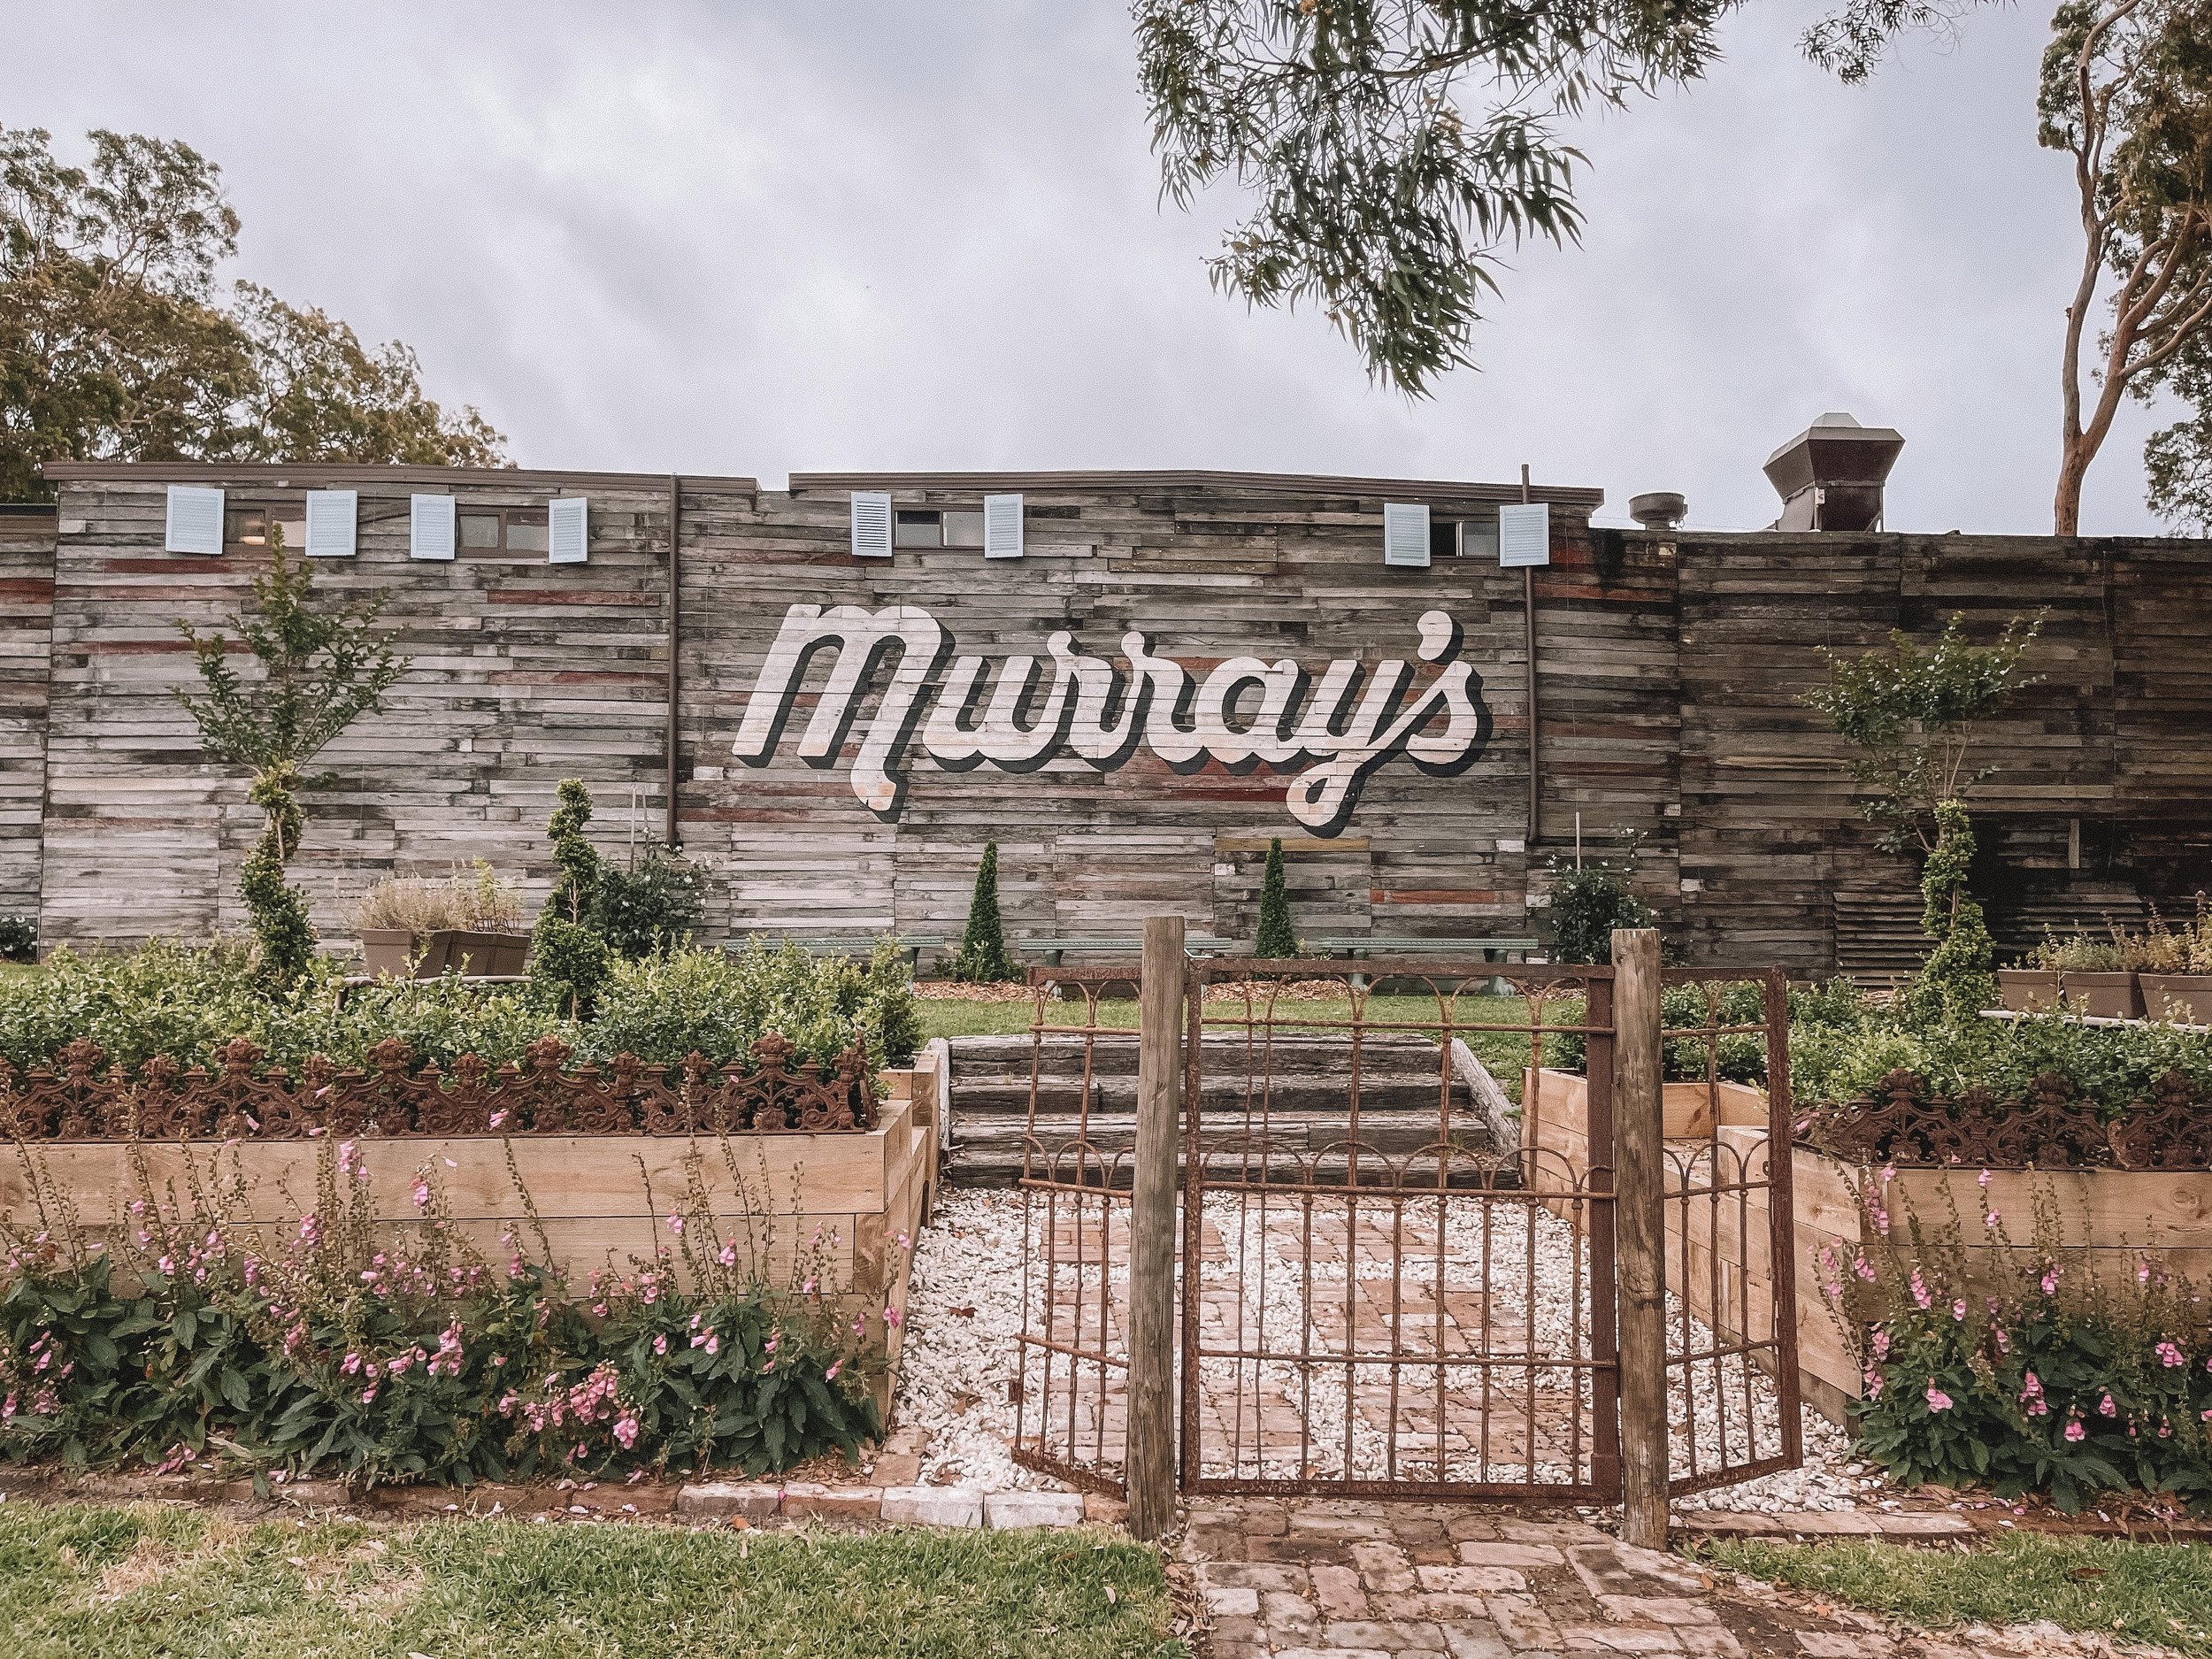 Murray's Brewery Entrance - Port Stephens - New South Wales (NSW) - Australia